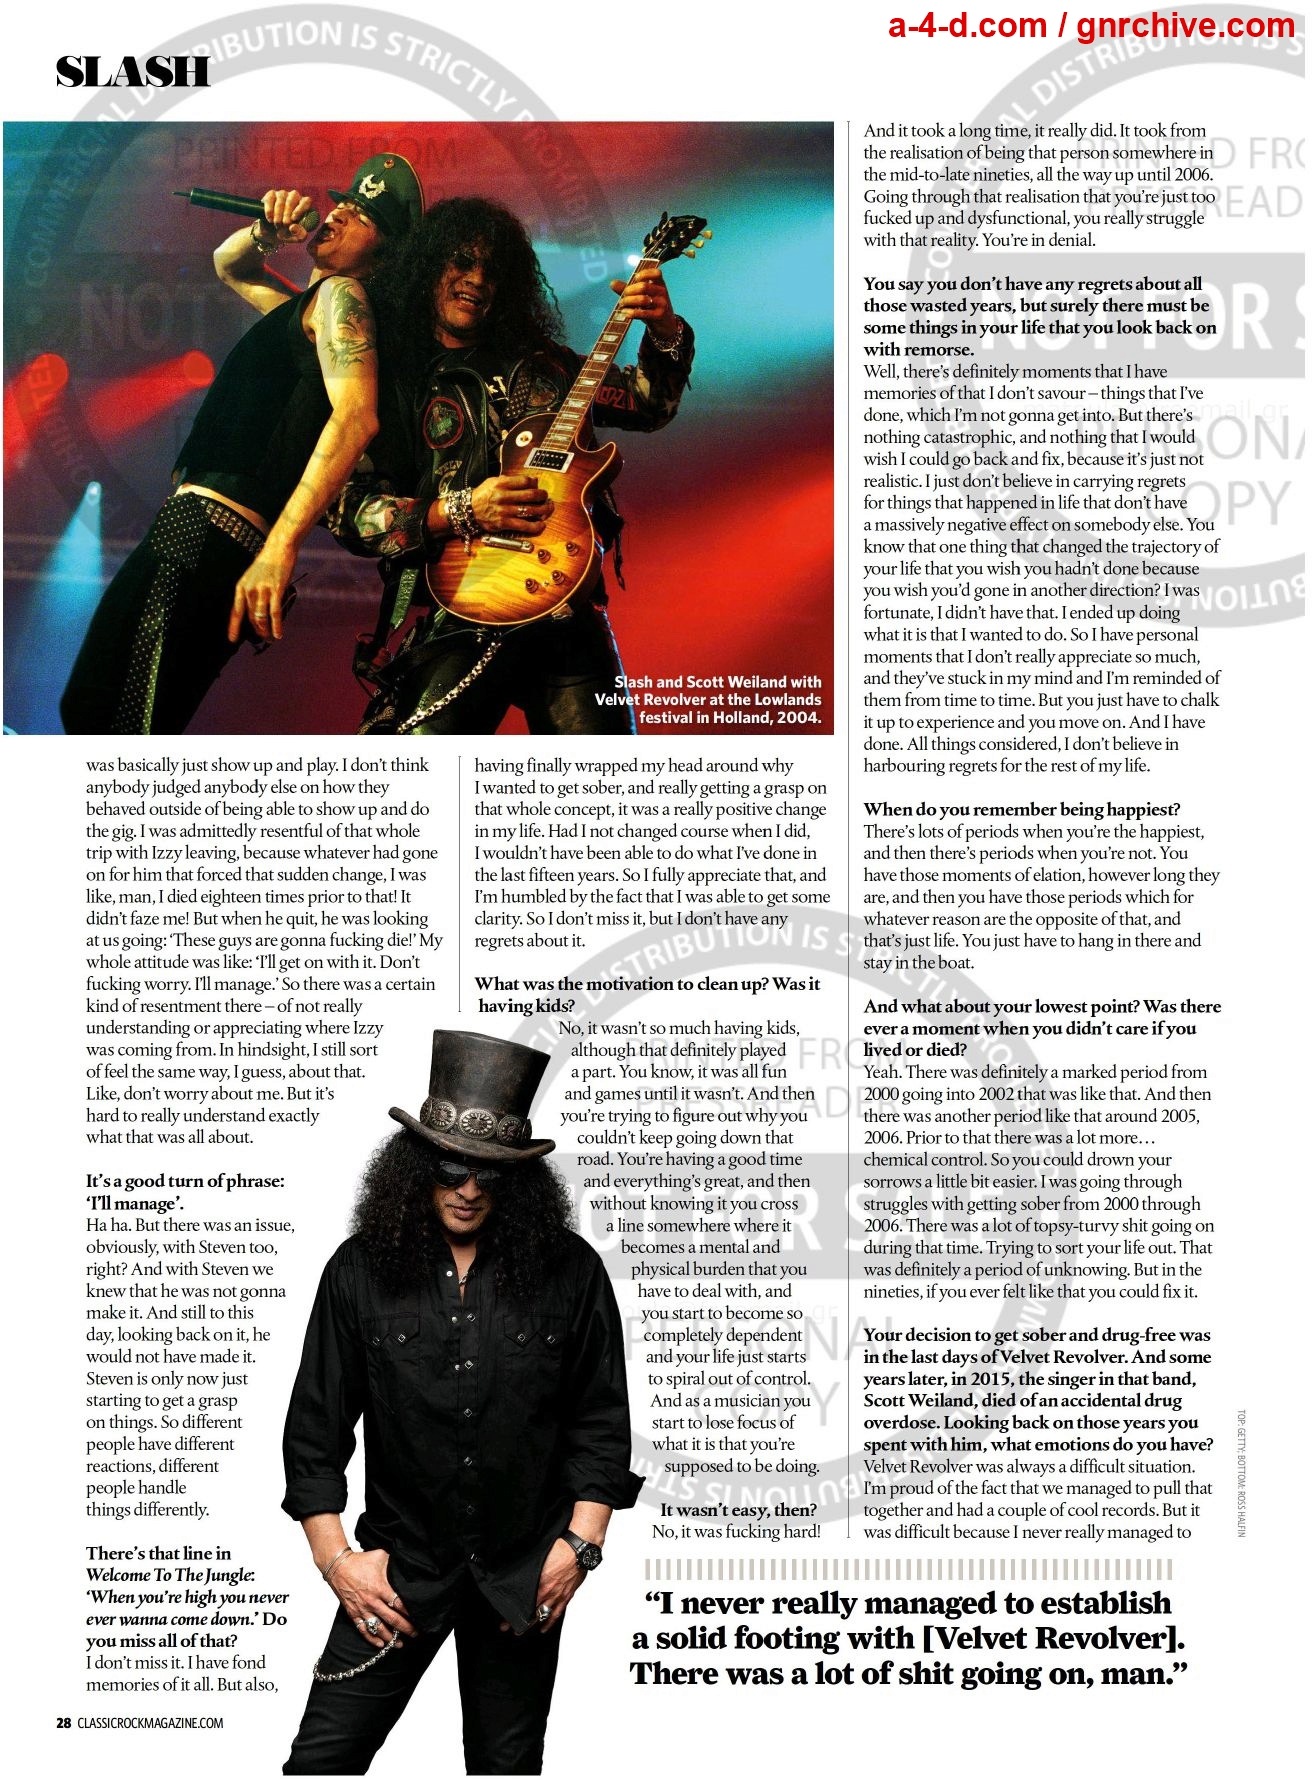 2022.02.DD - Classic Rock - Interview with Slash 2022_014